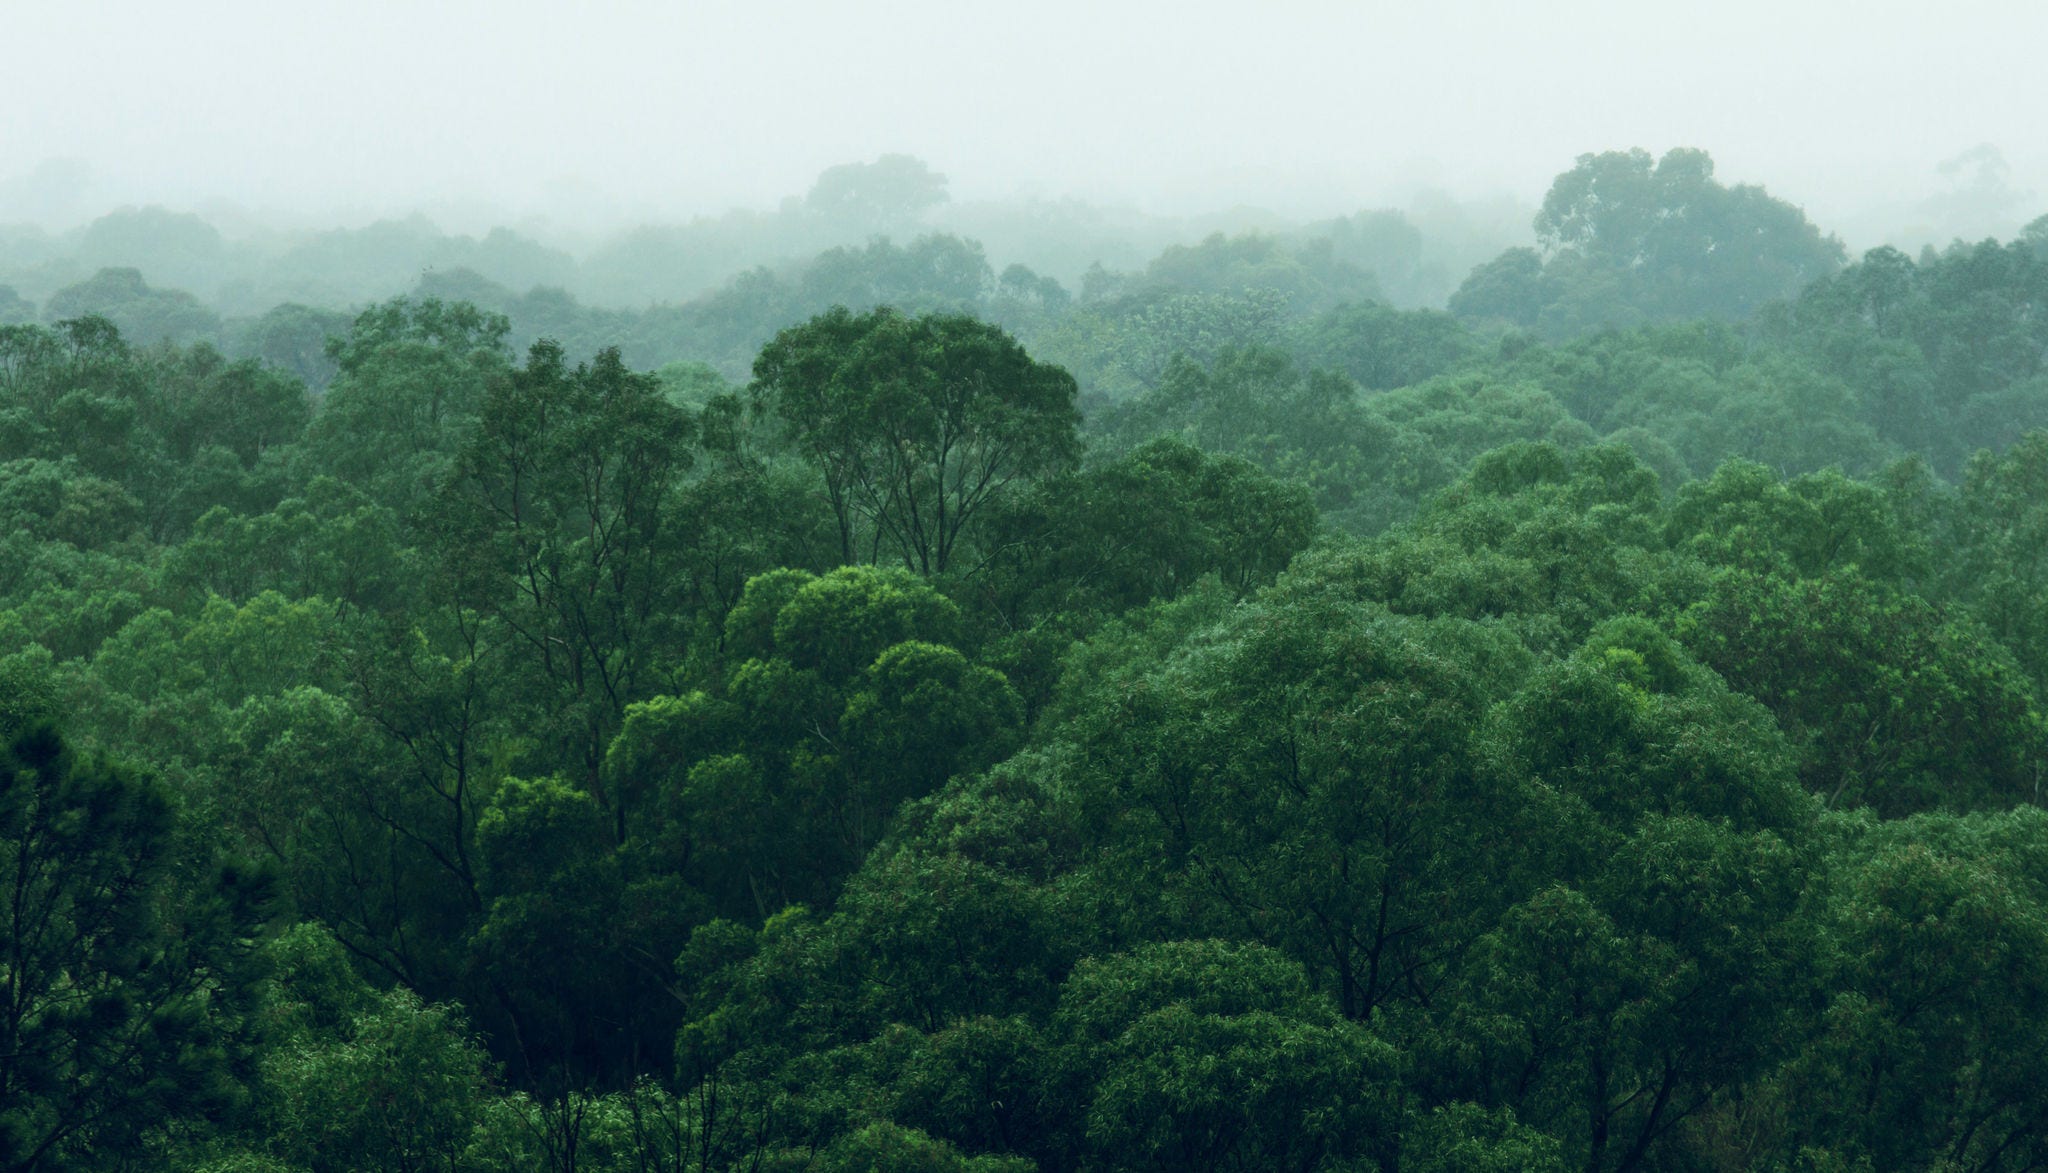 Biodiverse rainforest with bright green trees on a foggy day